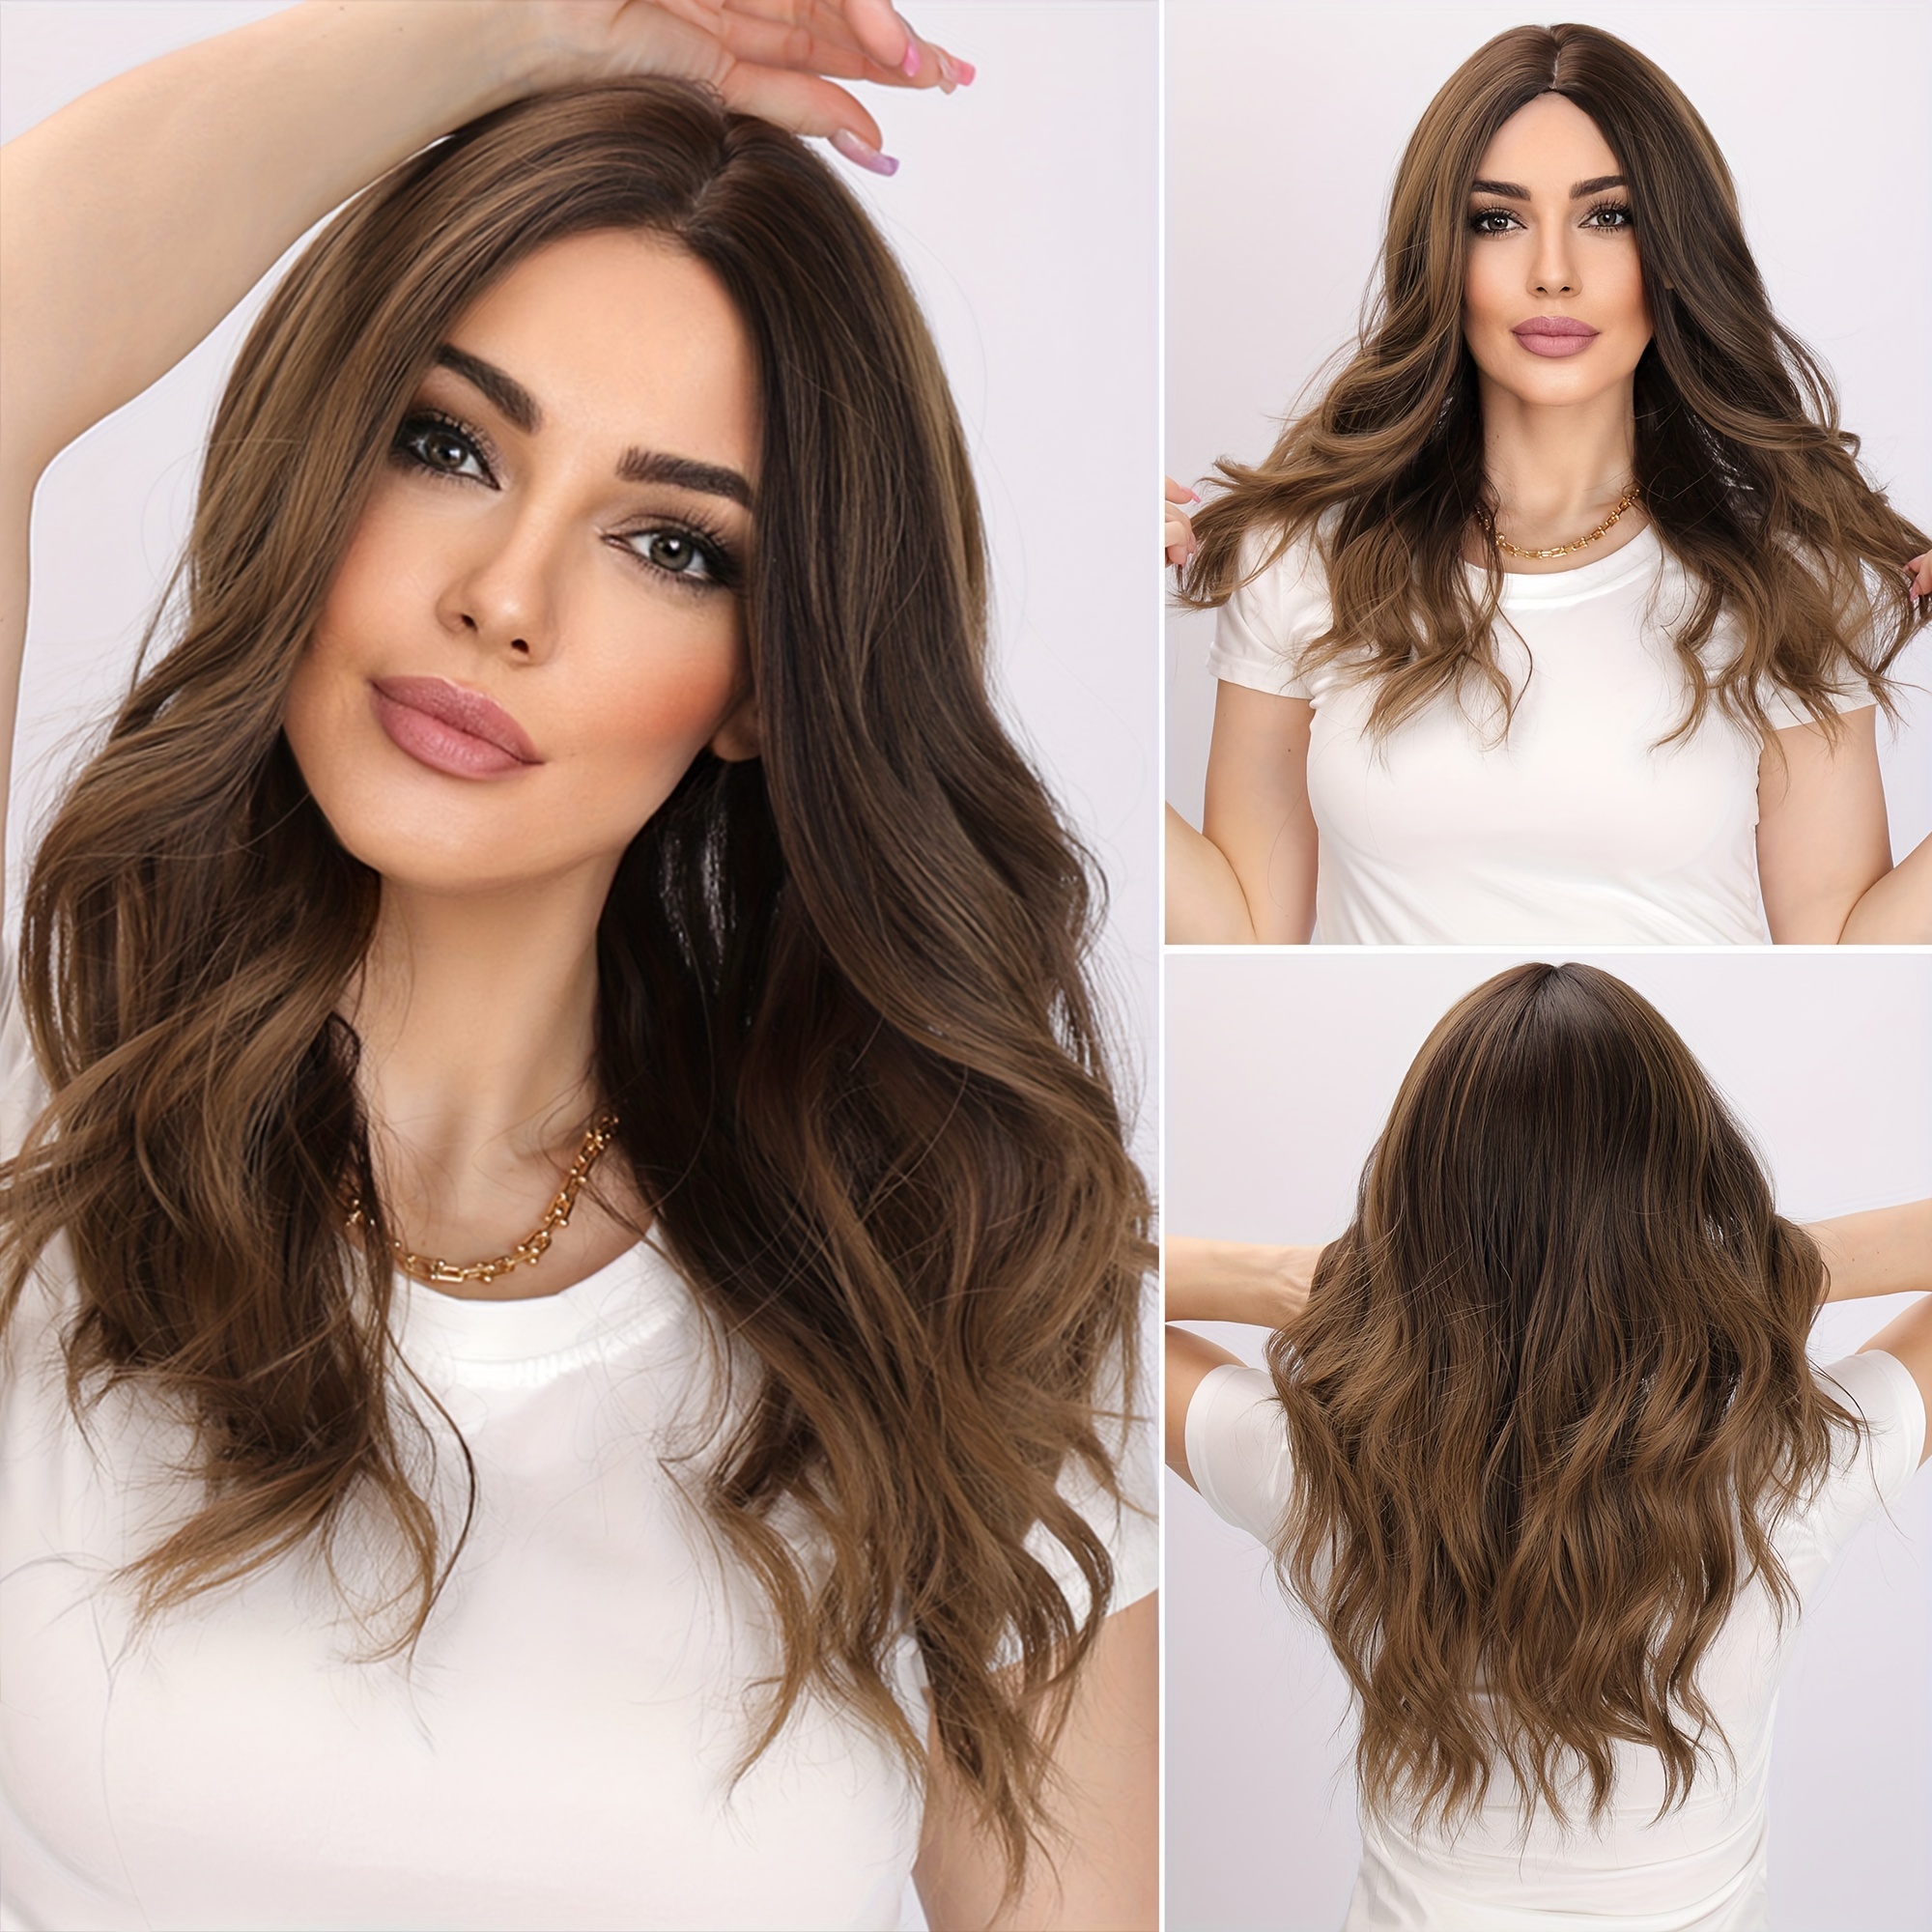 

Smilco 22 Inch Brown Gradient Curly Synthetic Wig - Heat-resistant, Easy To Shape, Paired With A Comfortable Rose Mesh Hat To Create A Daily Look